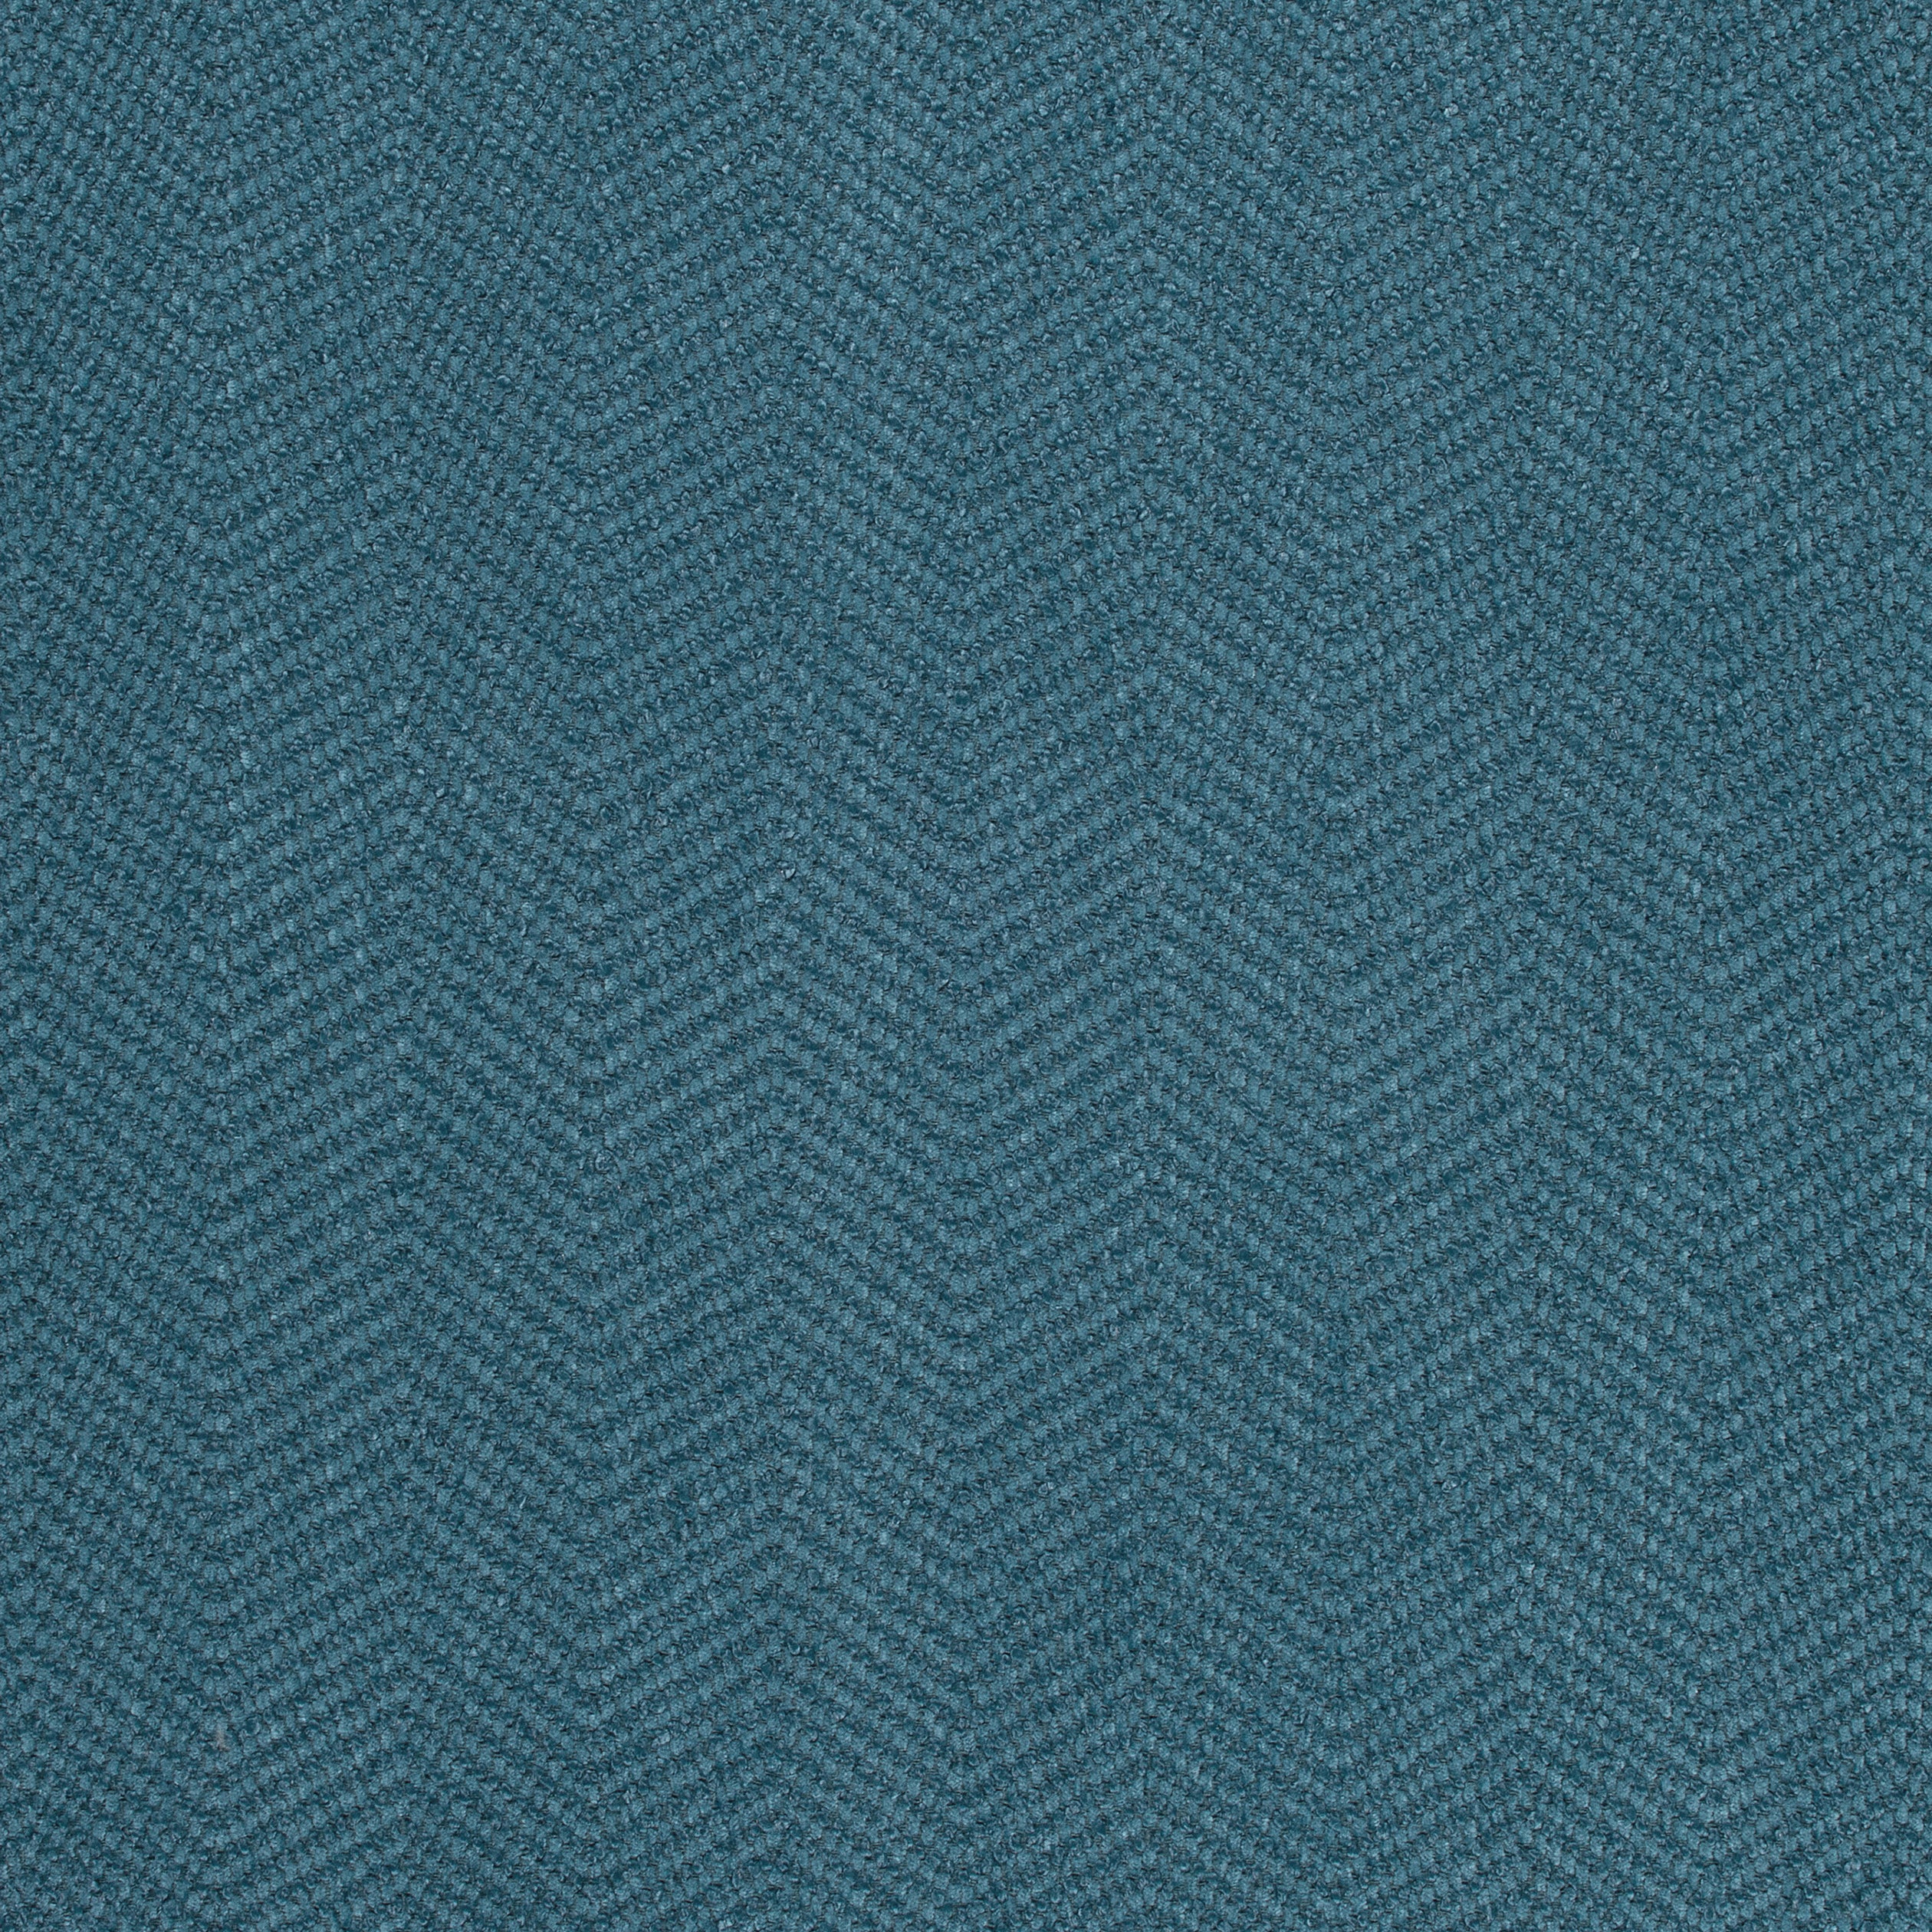 Dalton Herringbone fabric in peacock color - pattern number W80628 - by Thibaut in the Pinnacle collection